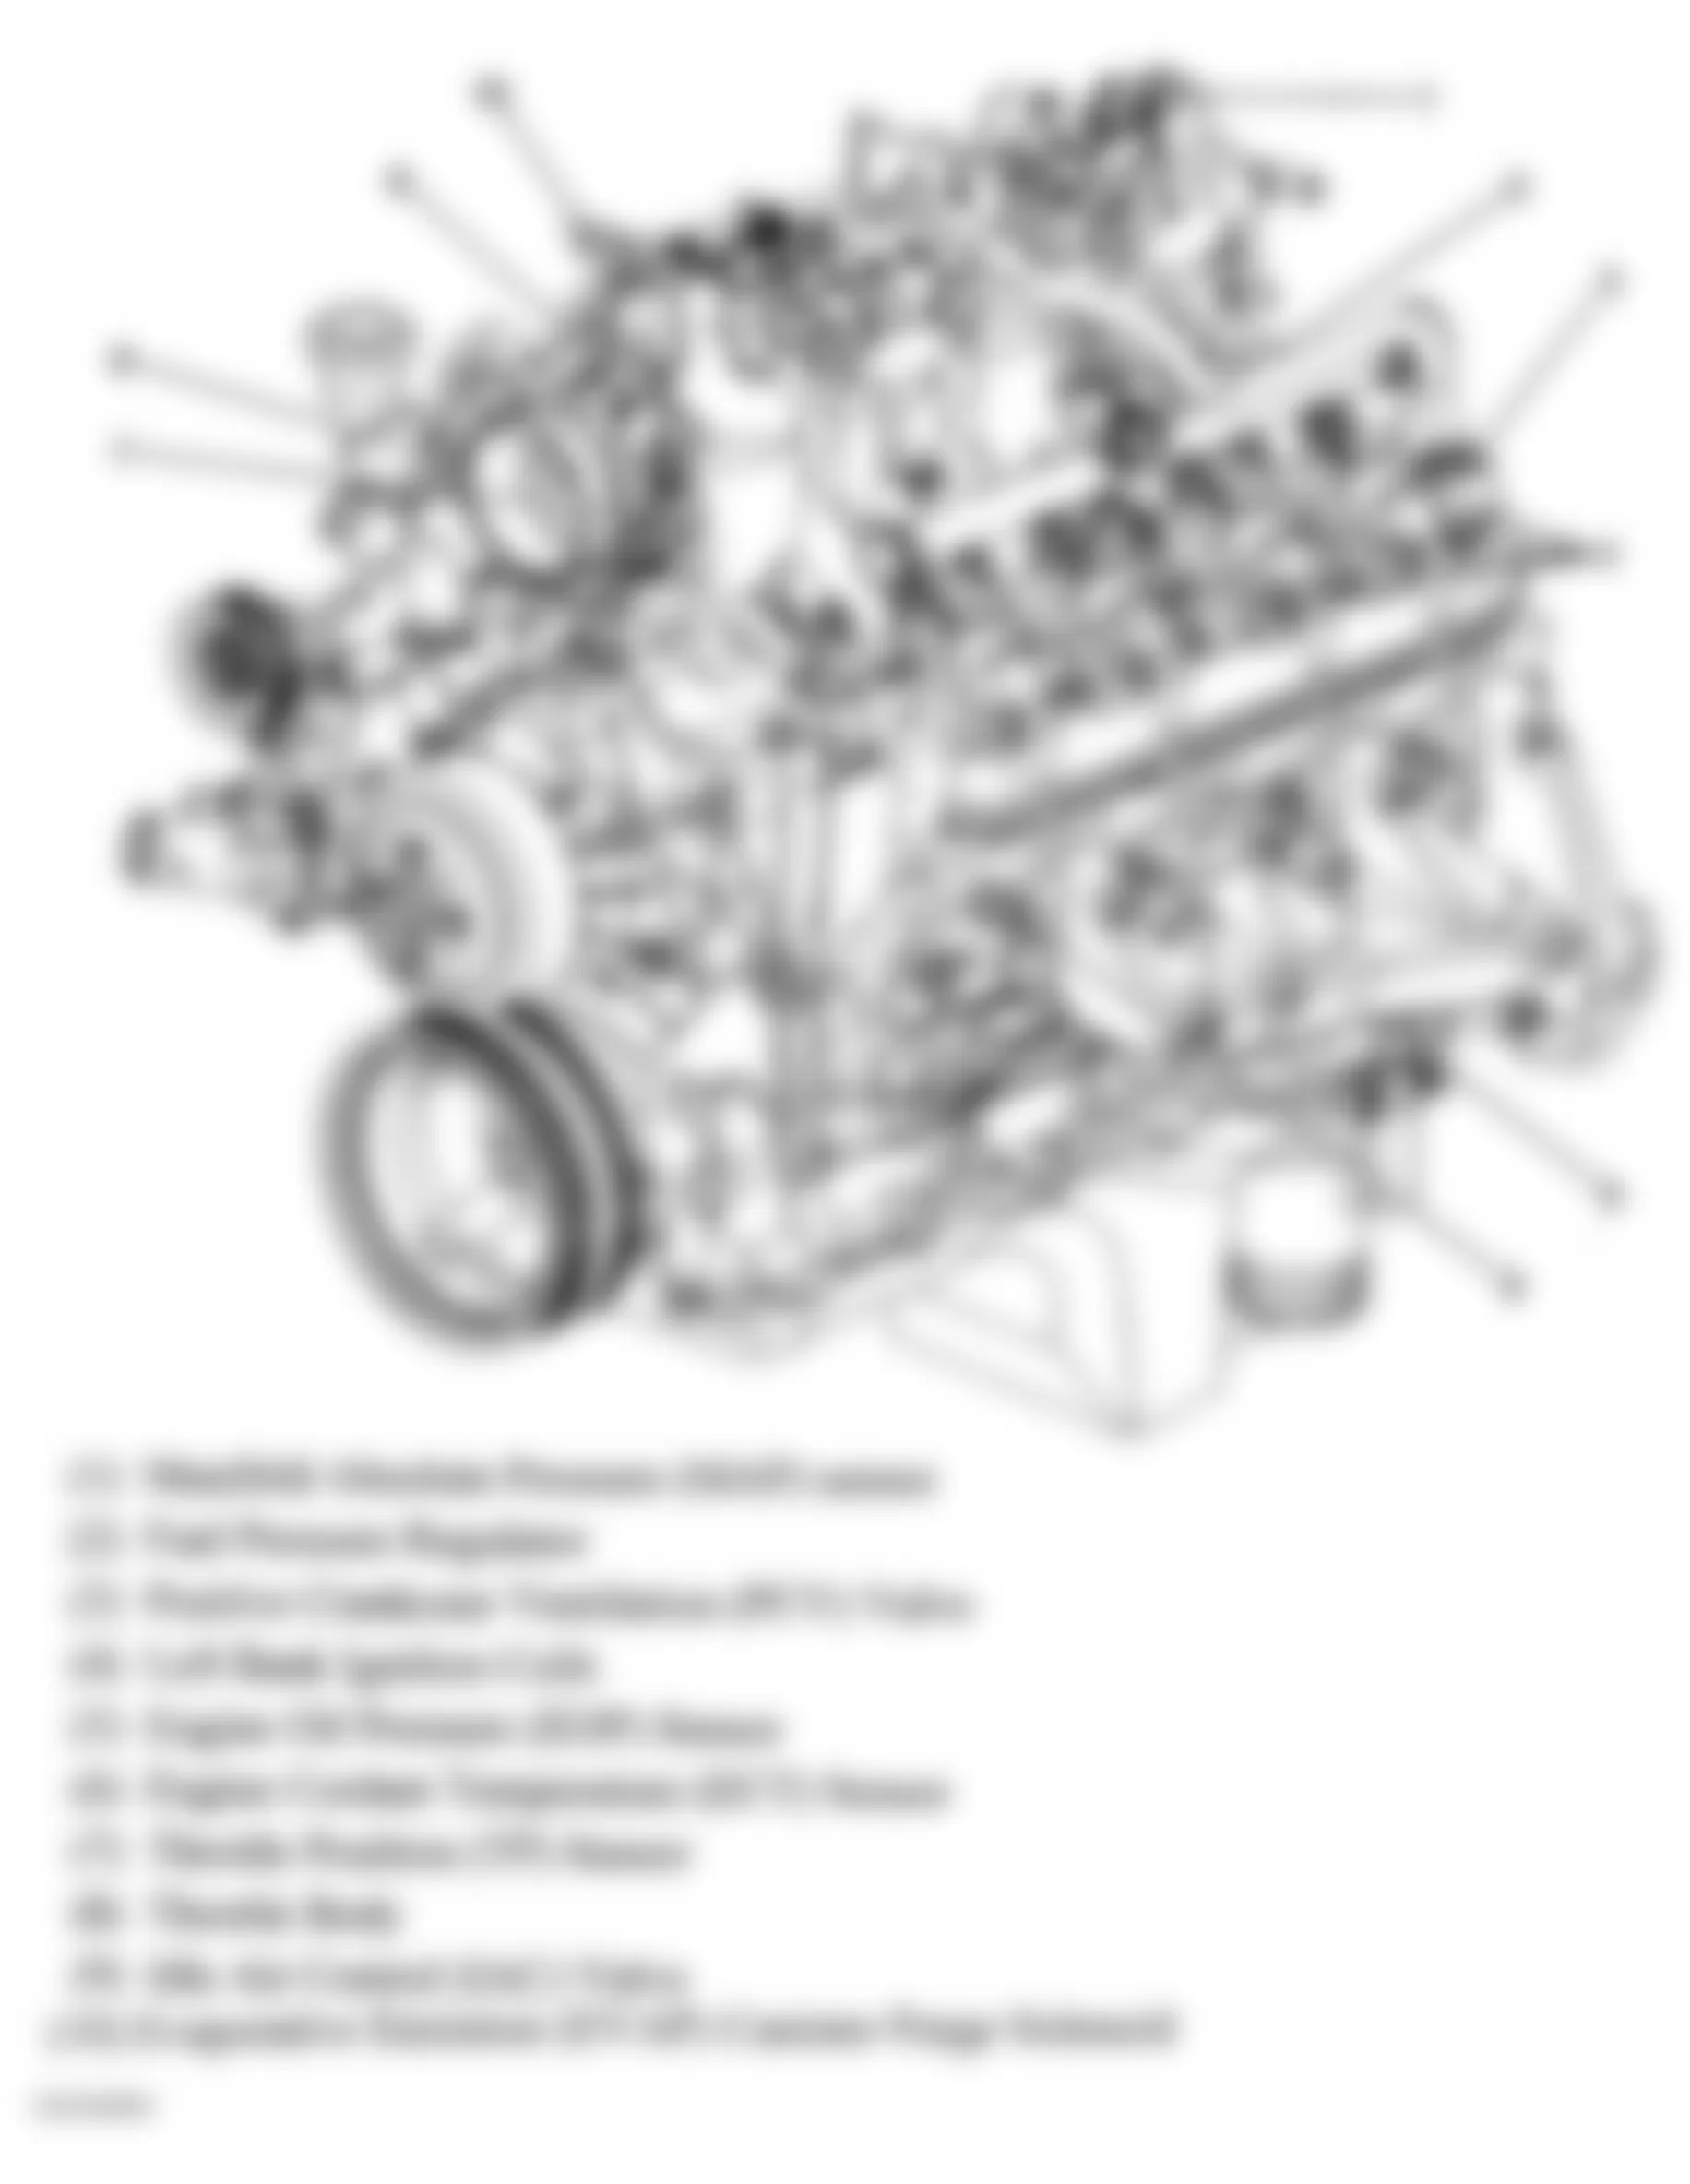 GMC Sierra 2500 HD 2005 - Component Locations -  Left Front Of Engine (4.8L, 5.3L & 6.0L)